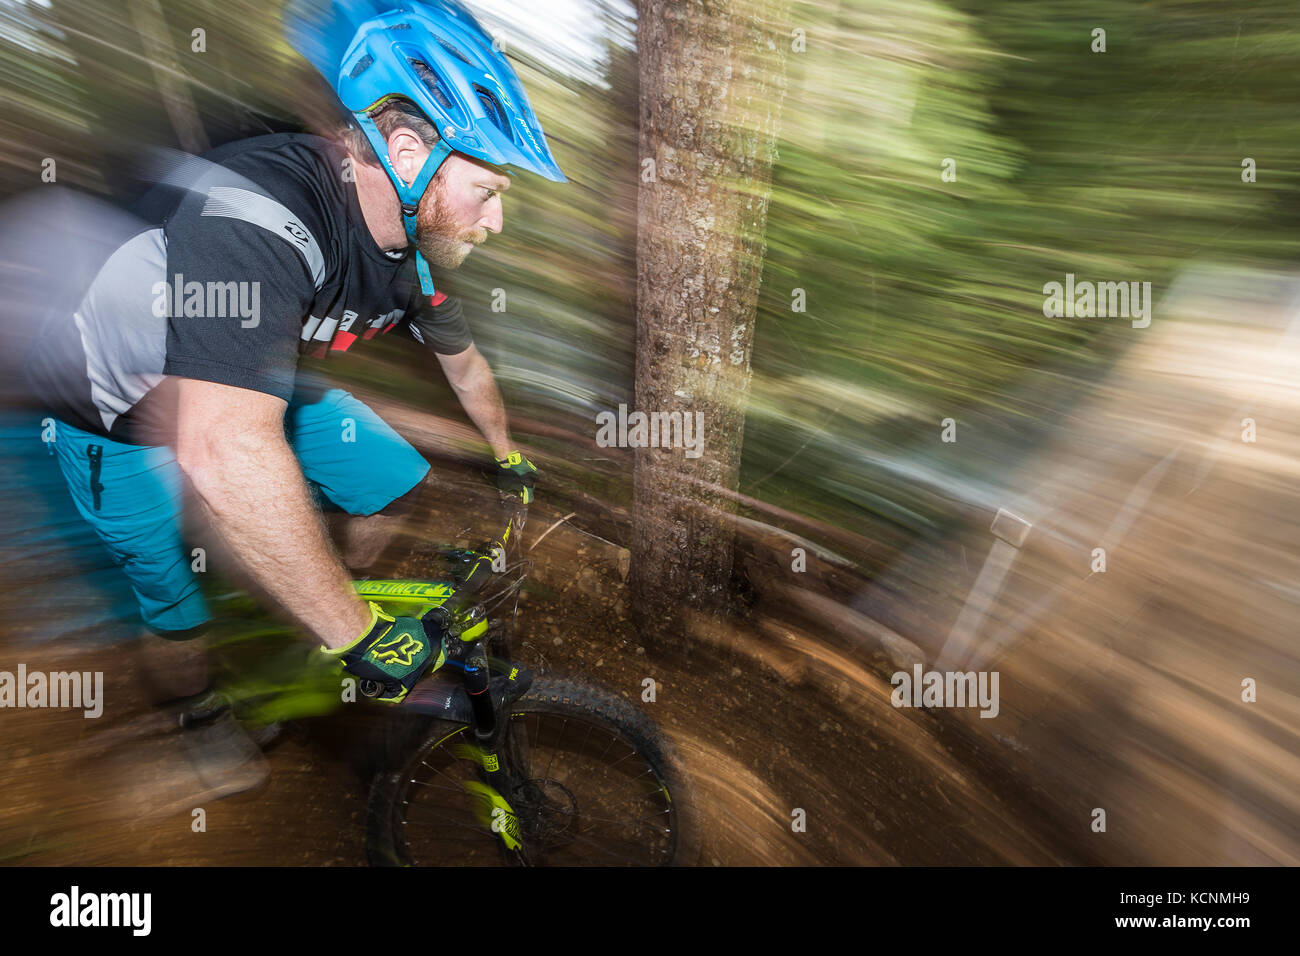 A motion oriented mountain biker prepares to cross the newly built Sykes Bridge while riding on one of the many mountian bike trails in the Cumberland area, Cumberland, The Comox Valley, Vancouver Island, British Columbia, Canada Stock Photo